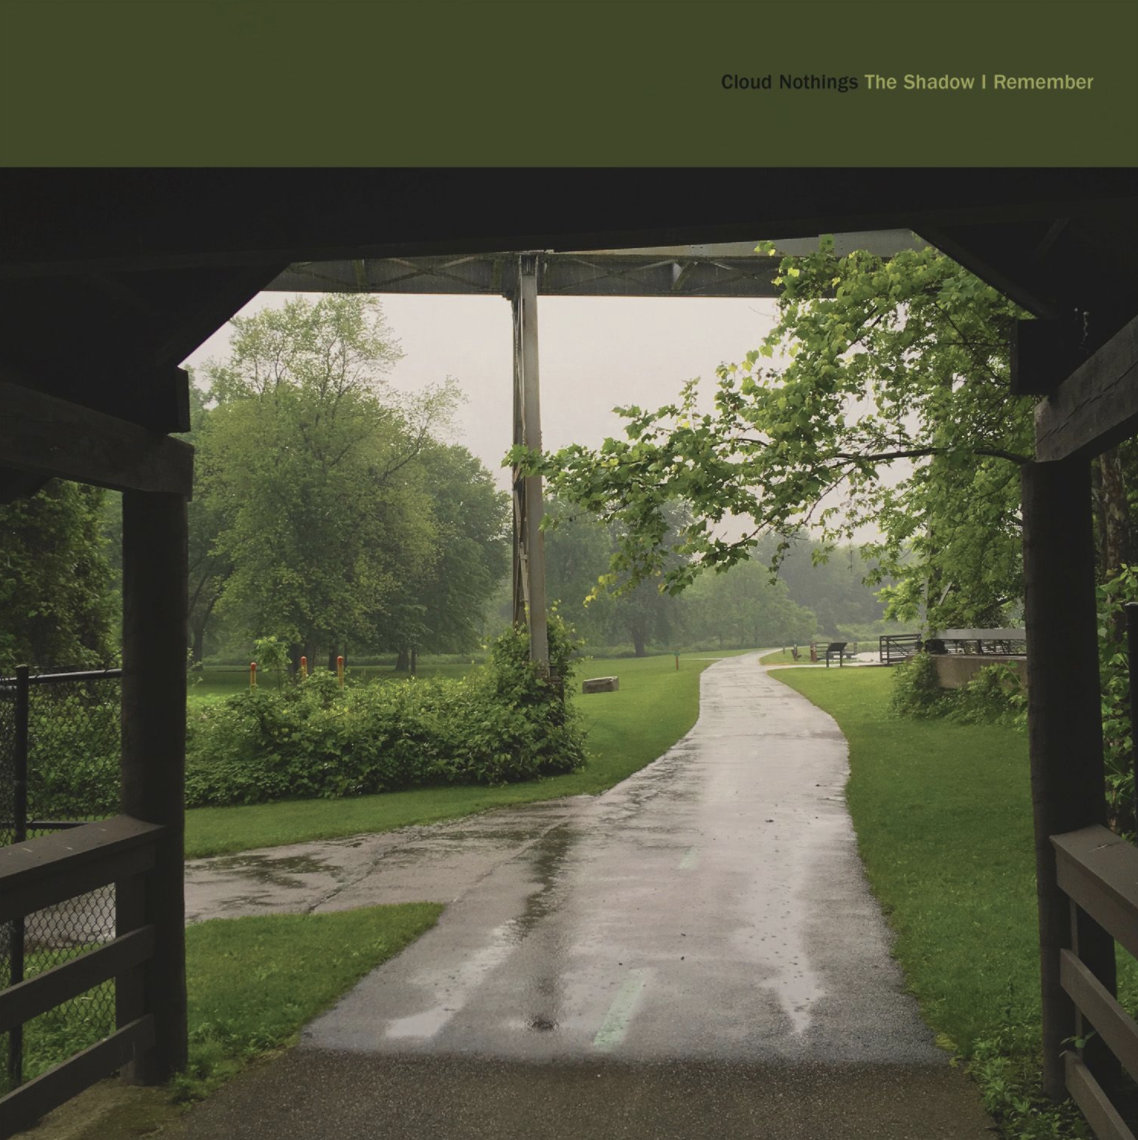 Cloud Nothings Announce New Album <i>
<p><em><strong>The Shadow I Remember </strong></em><strong>tracklist</strong></p>
<p>1. Oslo</p>
<p>2. Nothing Without You</p>
<p>3. The Spirit Of</p>
<p>4. Only Light</p>
<p>5. Nara</p>
<p>6. Open Rain</p>
<p>7. Sound Of Alarm</p>
<p>8. Am I Something</p>
<p>9. It’s Love</p>
<p>10. A Longer Moon</p>
<p>11. The Room It Was</p>
</p></p></p><p>To see our running list of the top 100 greatest rock stars of all time, <a href=